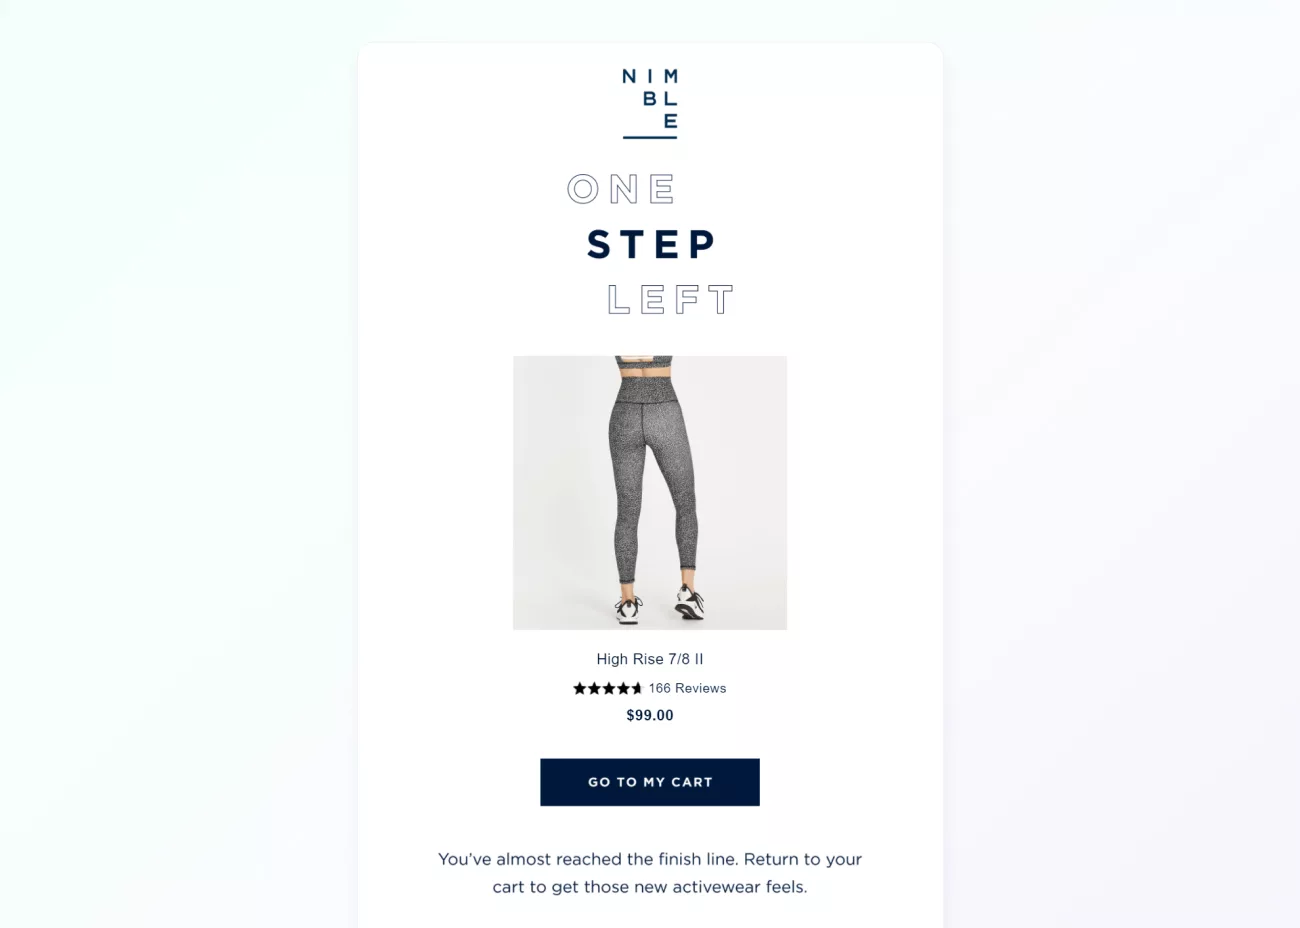 User-generated content of high-rise legging activewear for abandoned cart email marketing campaigns